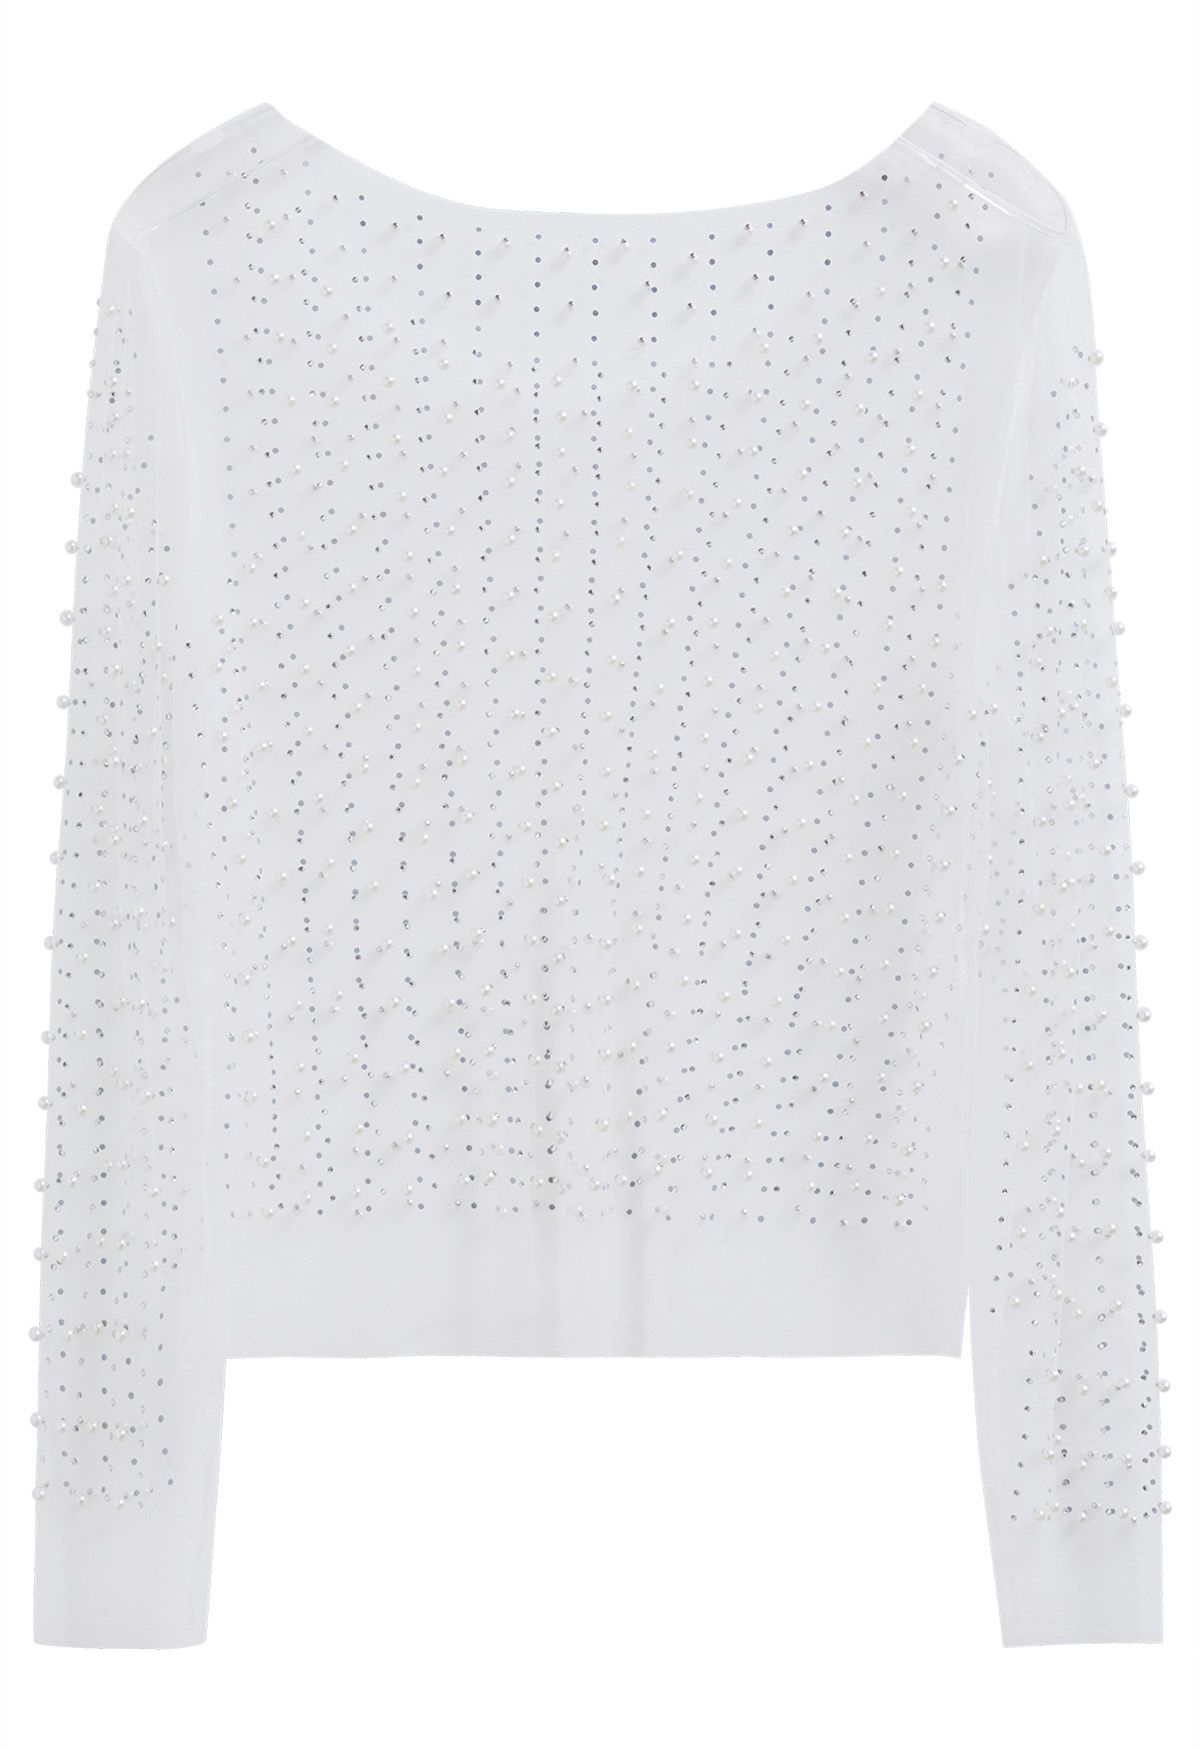 Pearl Crop Top White - $62 (38% Off Retail) - From Abbey